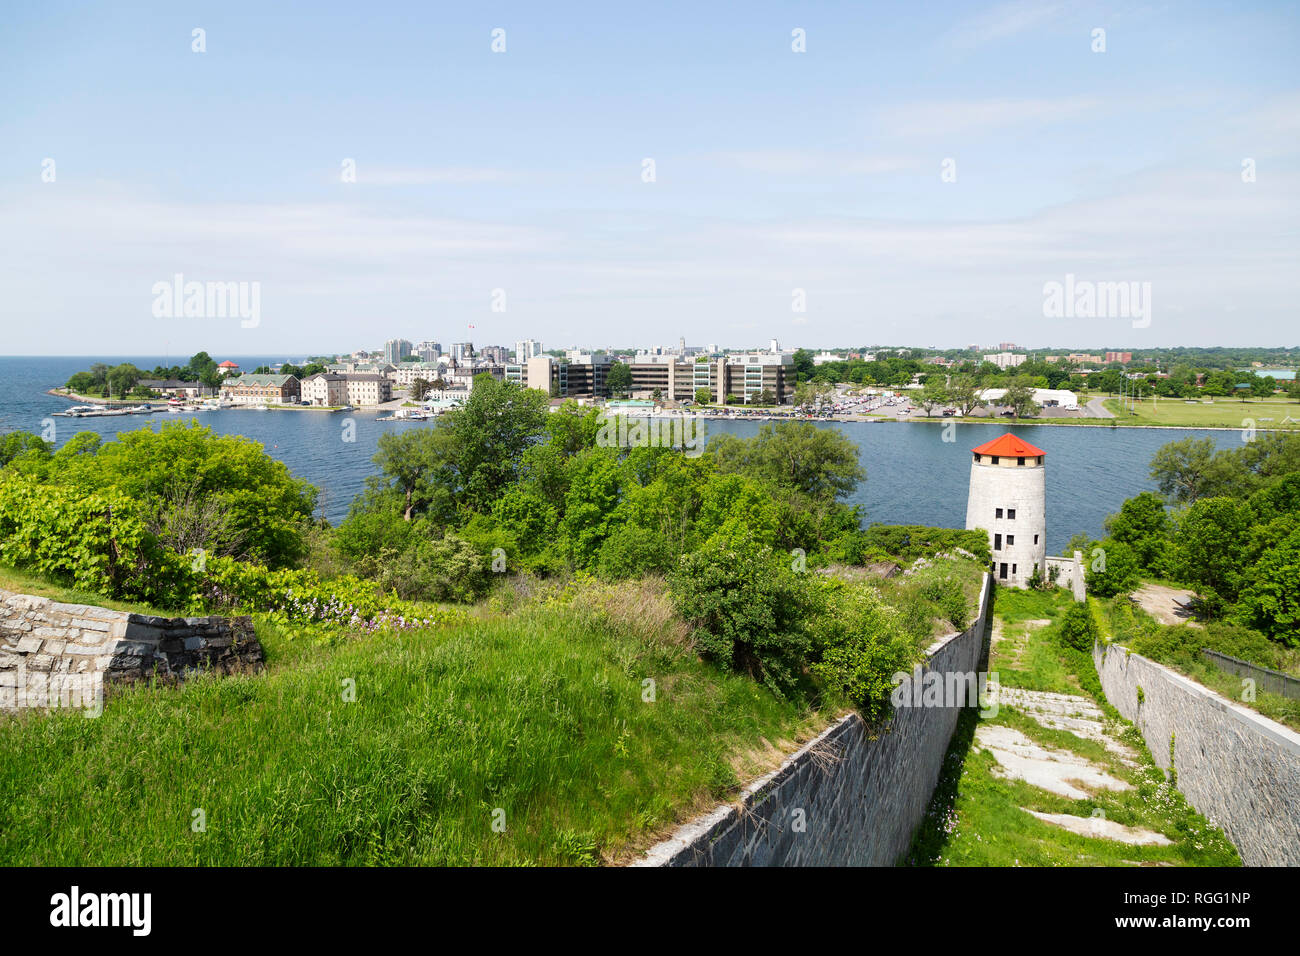 A Martello Tower overlooking the Cataraqui River and city of Kingston, Ontario, in Canada. Stock Photo